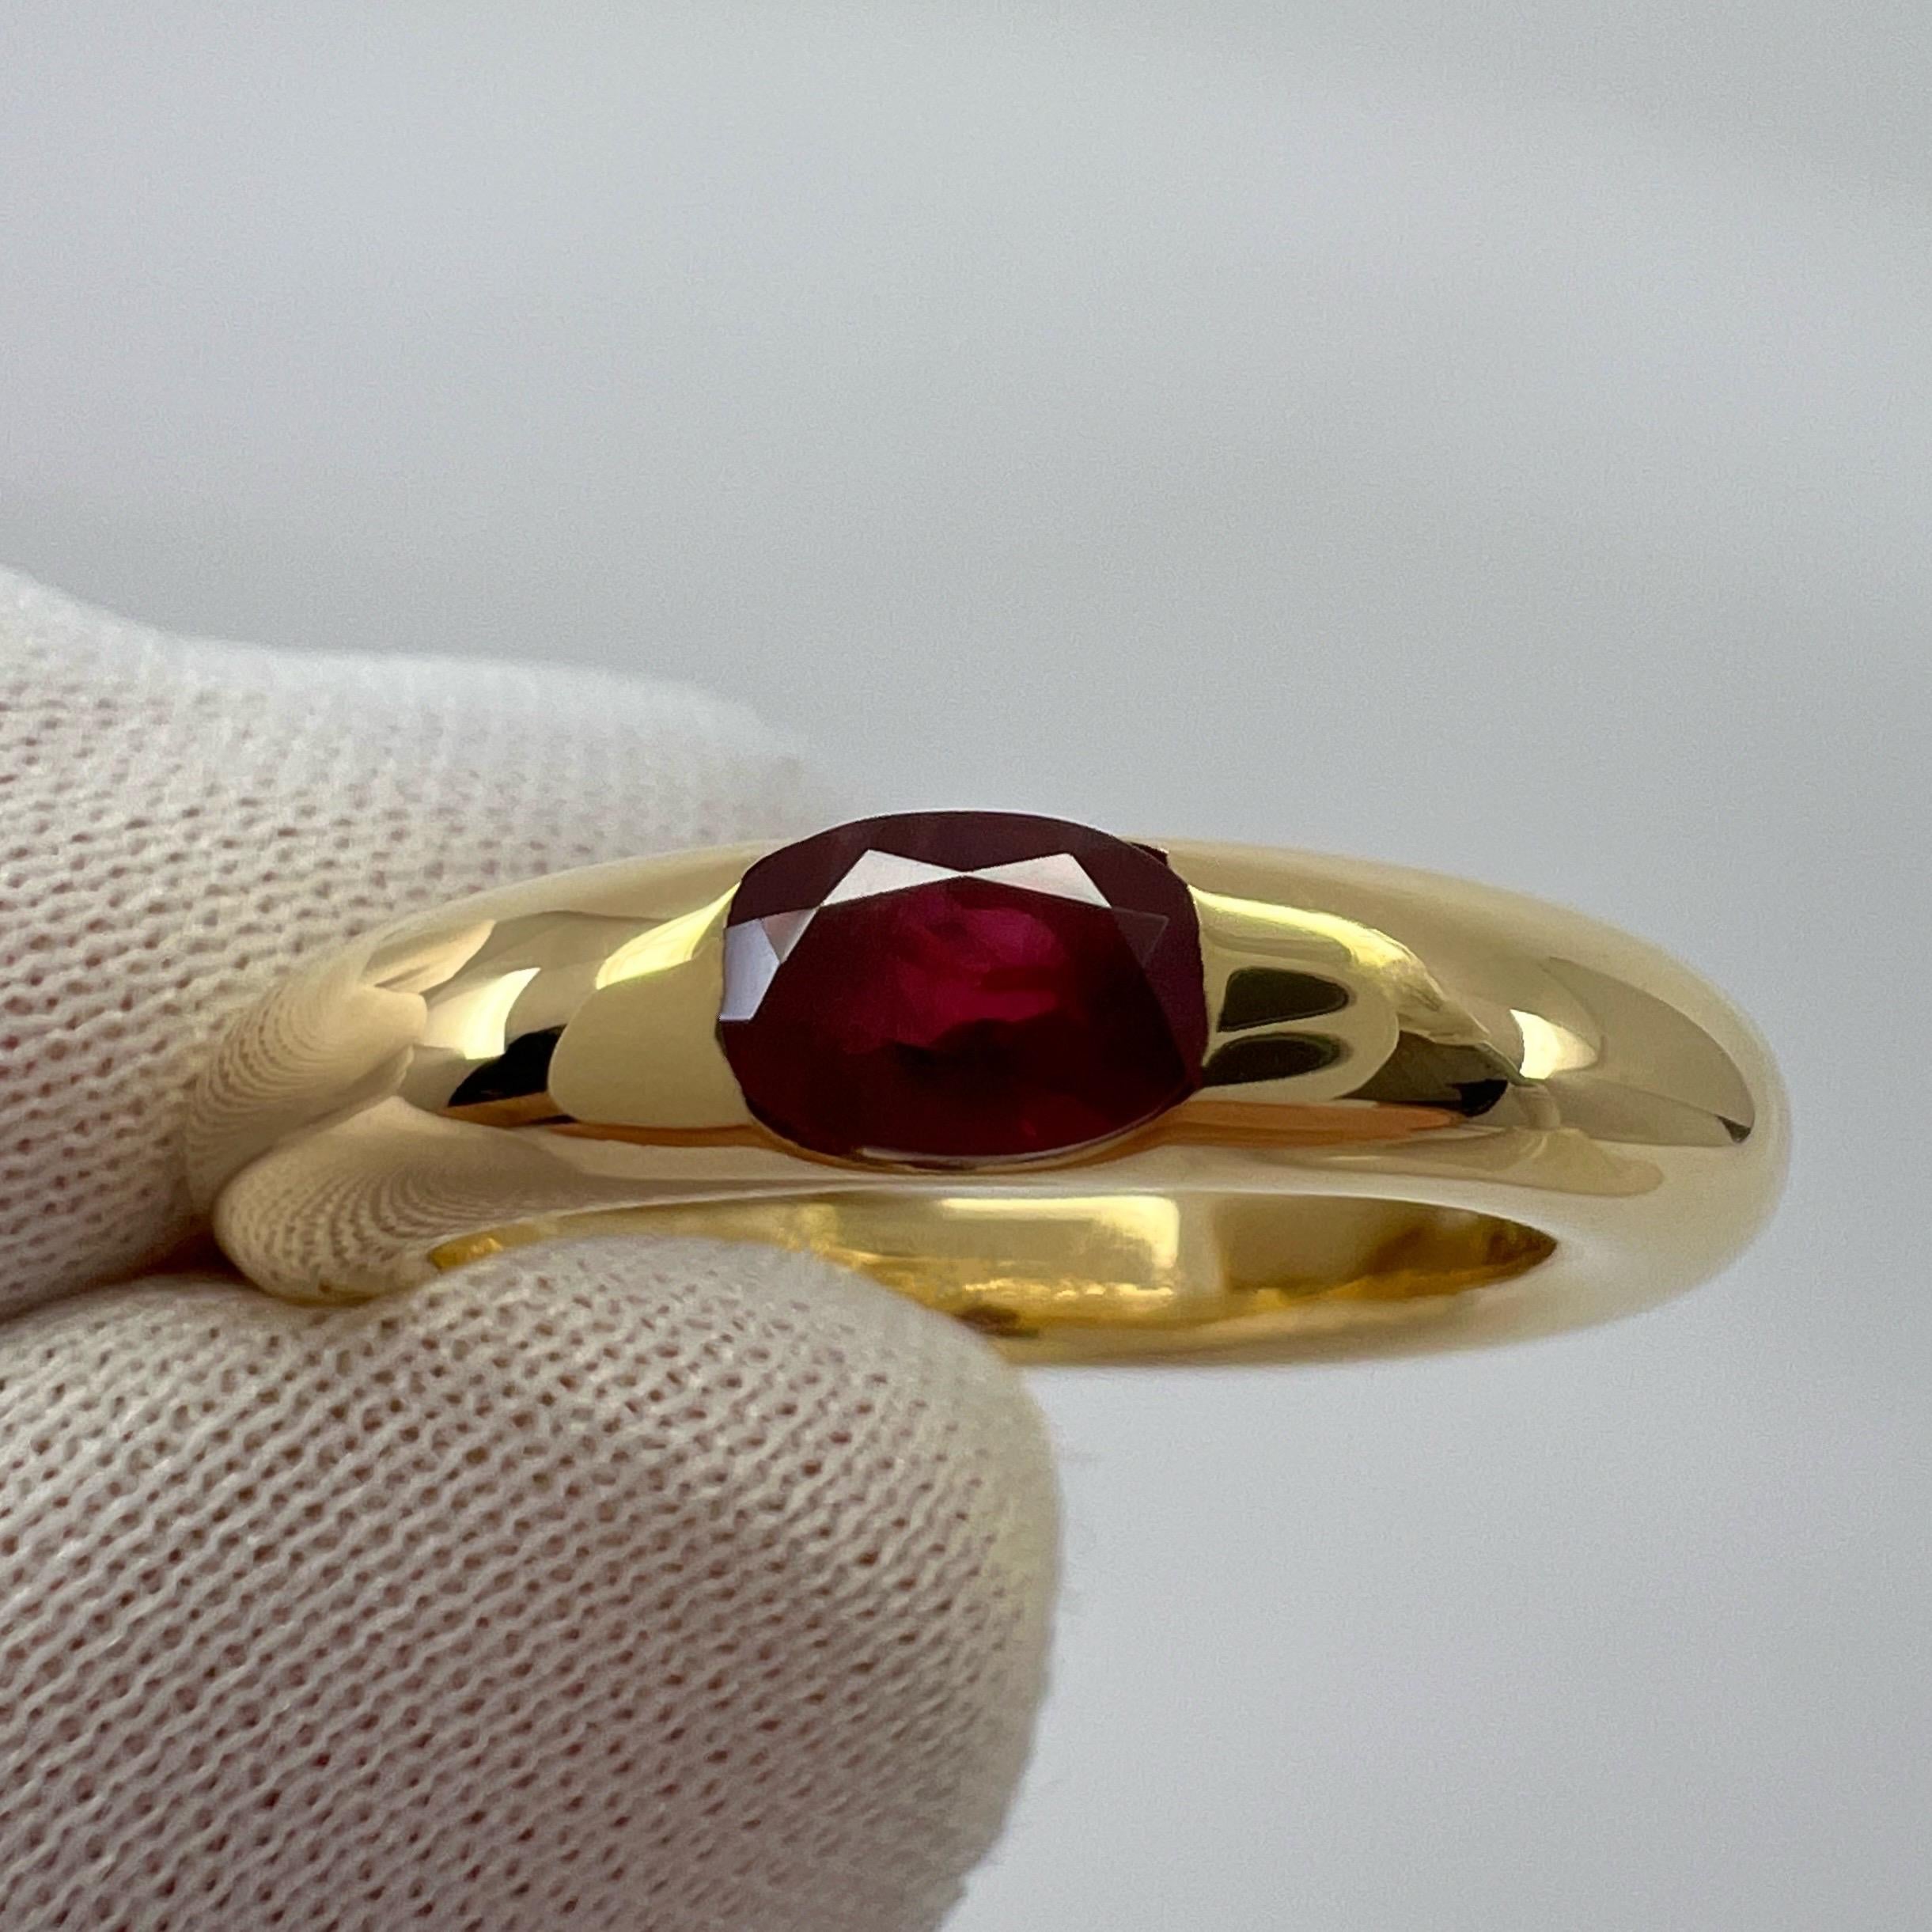 Women's or Men's Vintage Cartier Deep Red Ruby Ellipse 18k Yellow Gold Oval Solitaire Ring 52 US6